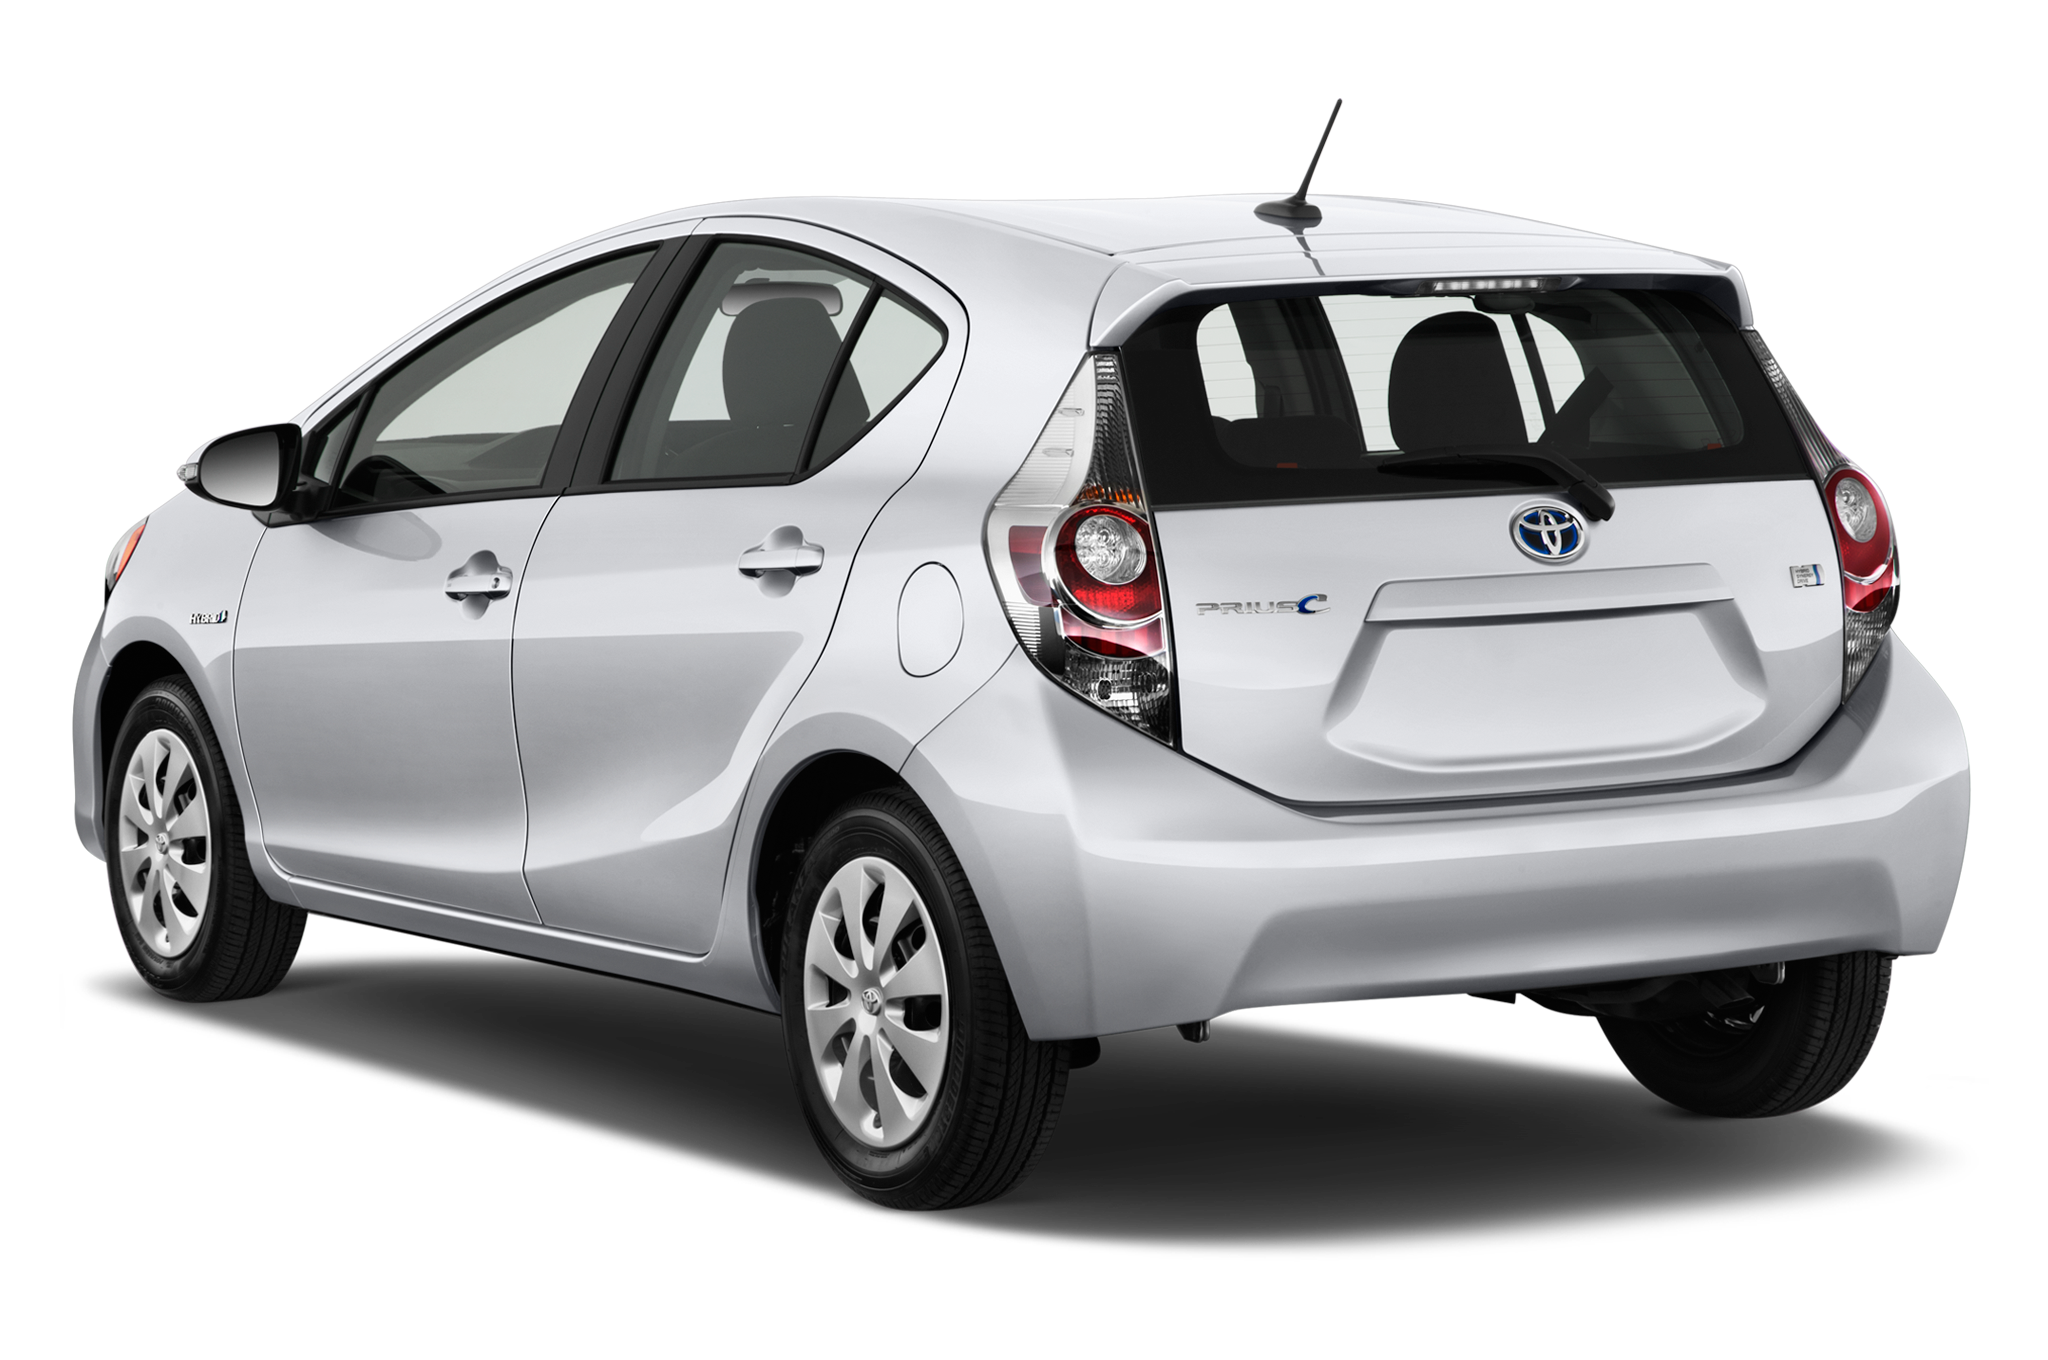 2014 Toyota Prius c Hybrid Hatchback Review | The Mommy Insider